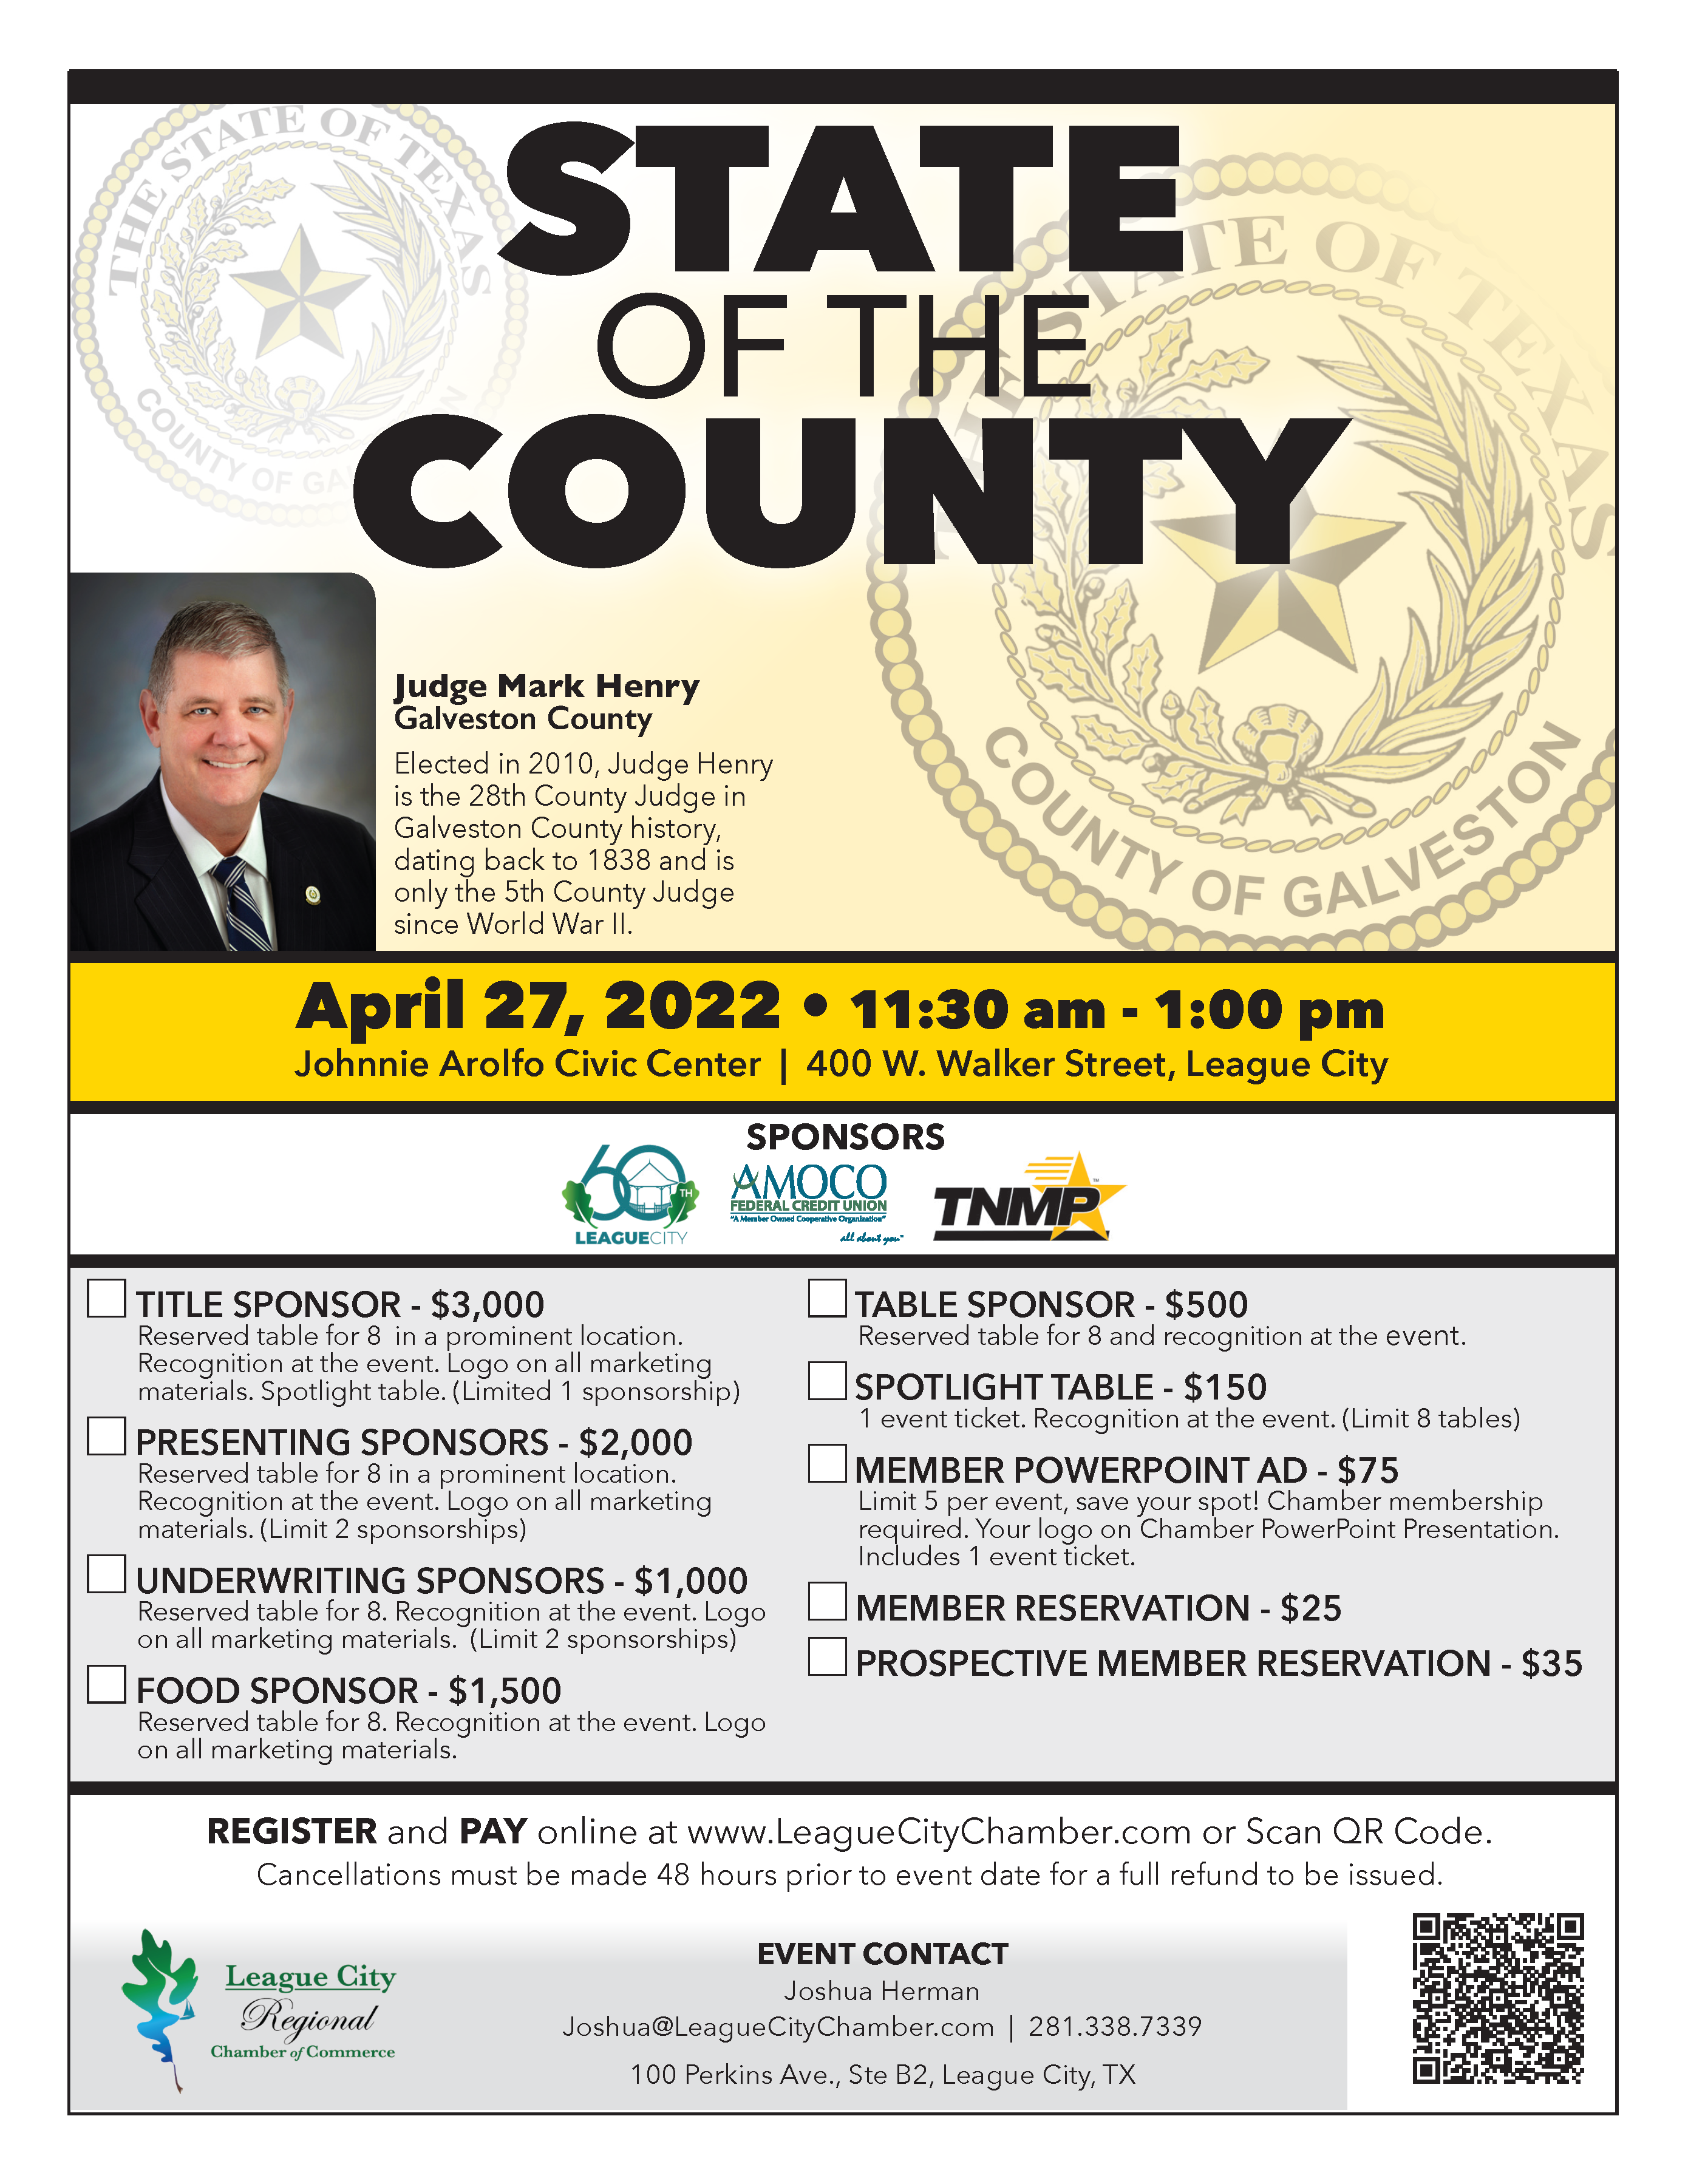 Image for NEWS RELEASE: League City Regional Chamber of Commerce to host annual State of the County